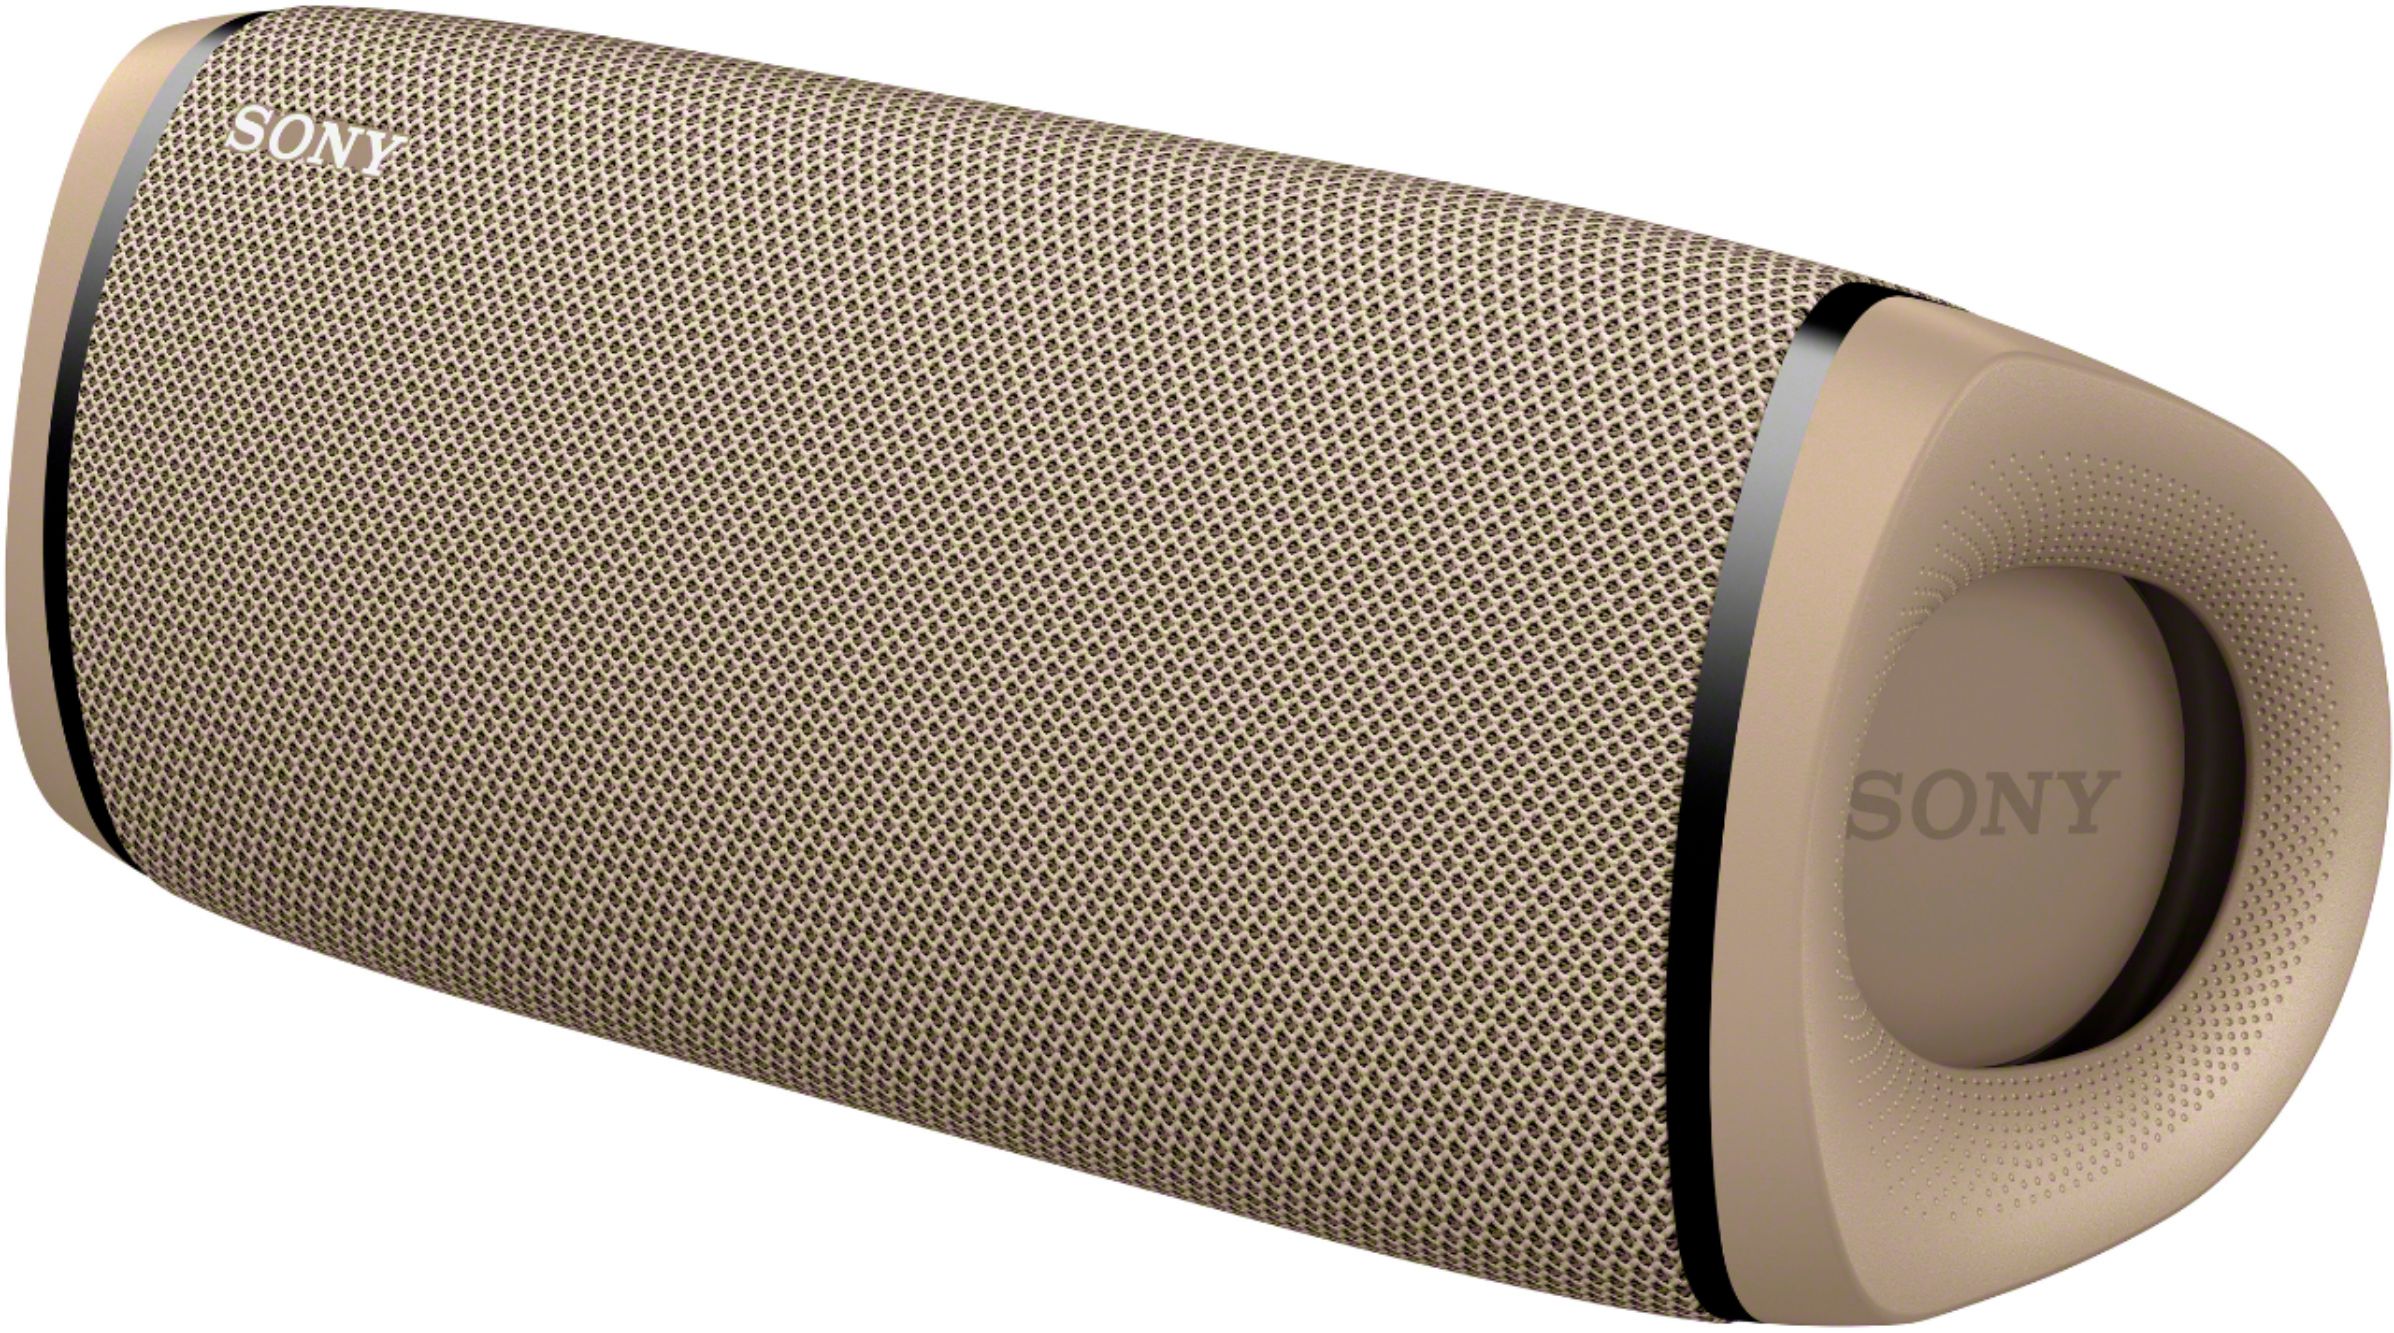 Sony - SRS-XB43 Portable Bluetooth Speaker - Taupe